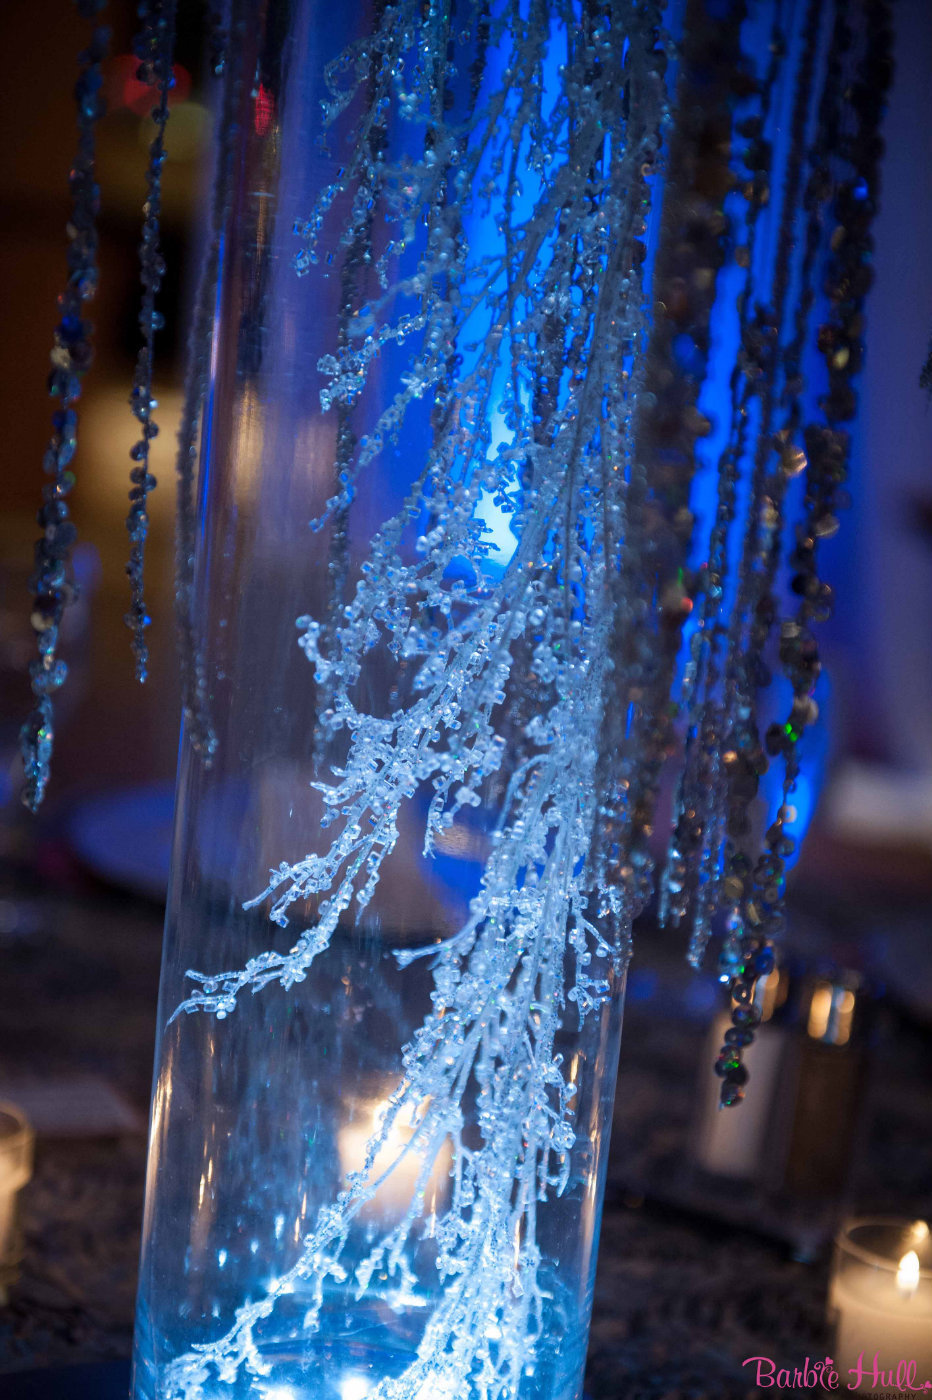 sparkly branches inside glass vase for winter party centerpiece